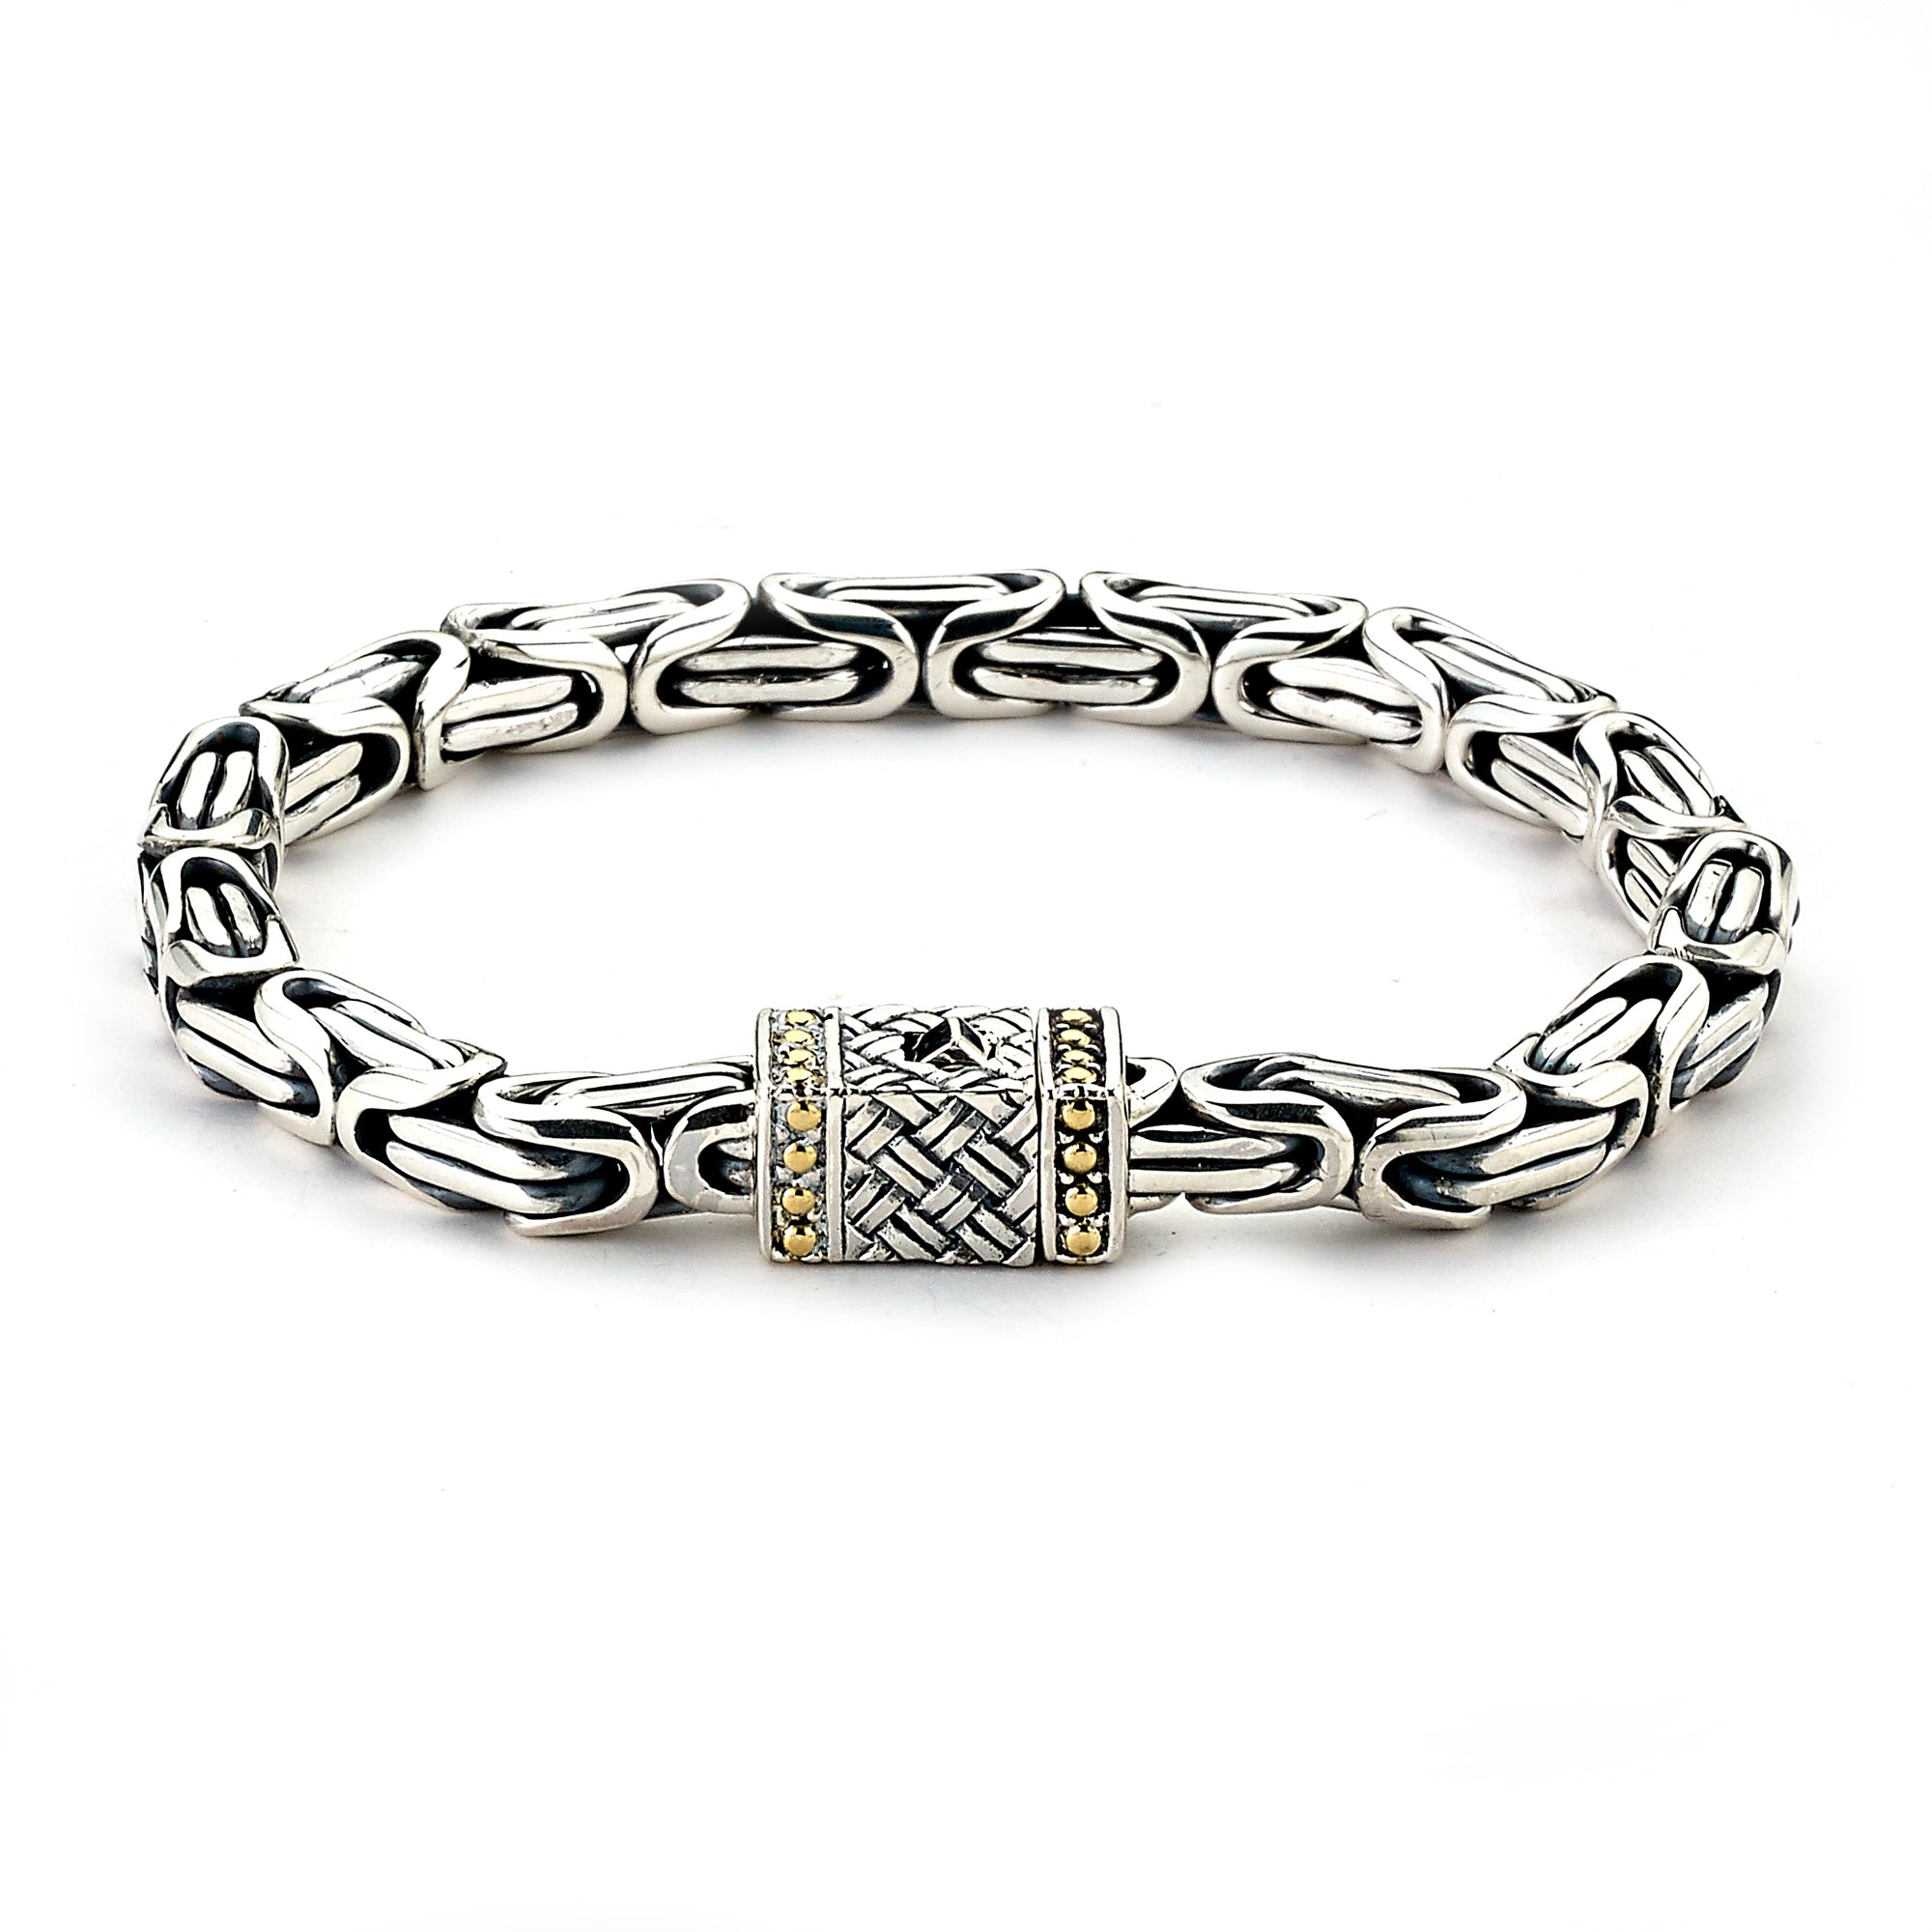 Embargo Bracelet available at Talisman Collection Fine Jewelers in El Dorado Hills, CA and online. Specs: Embargo Bracelet crafted in Sterling Silver and 18k gold features a Byzantine design with box lock. 8" long. 